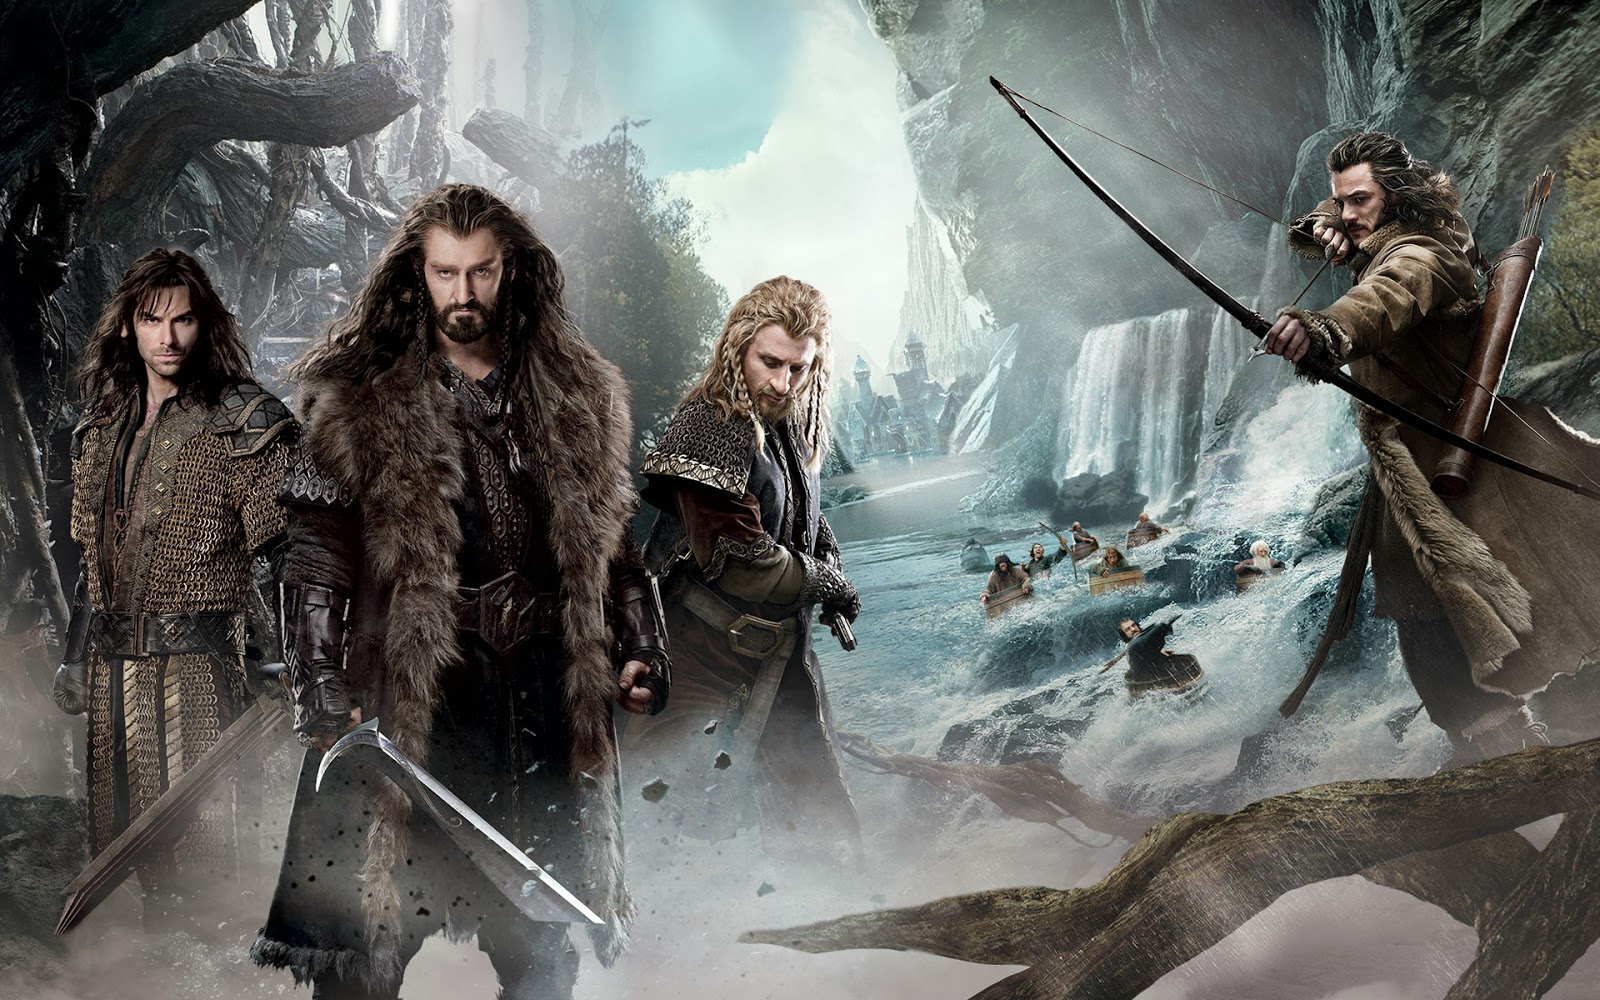 Download The Hobbit: The Desolation of Smaug Streaming In HD